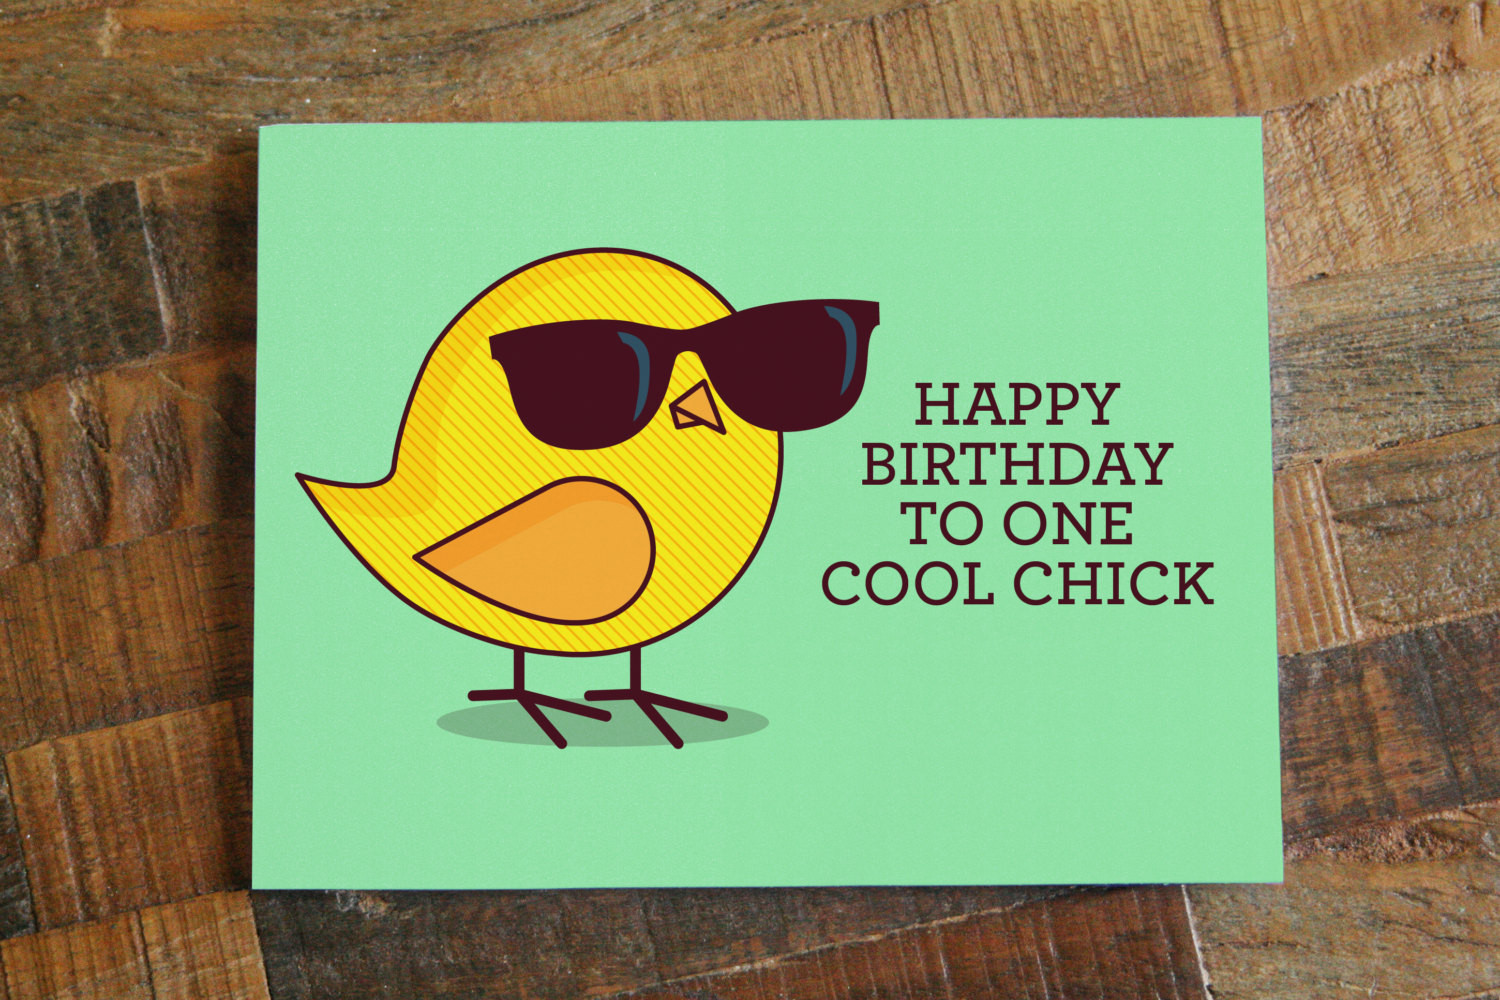 Funny Happy Birthday Card
 Funny Birthday Card For Her Happy Birthday to e Cool